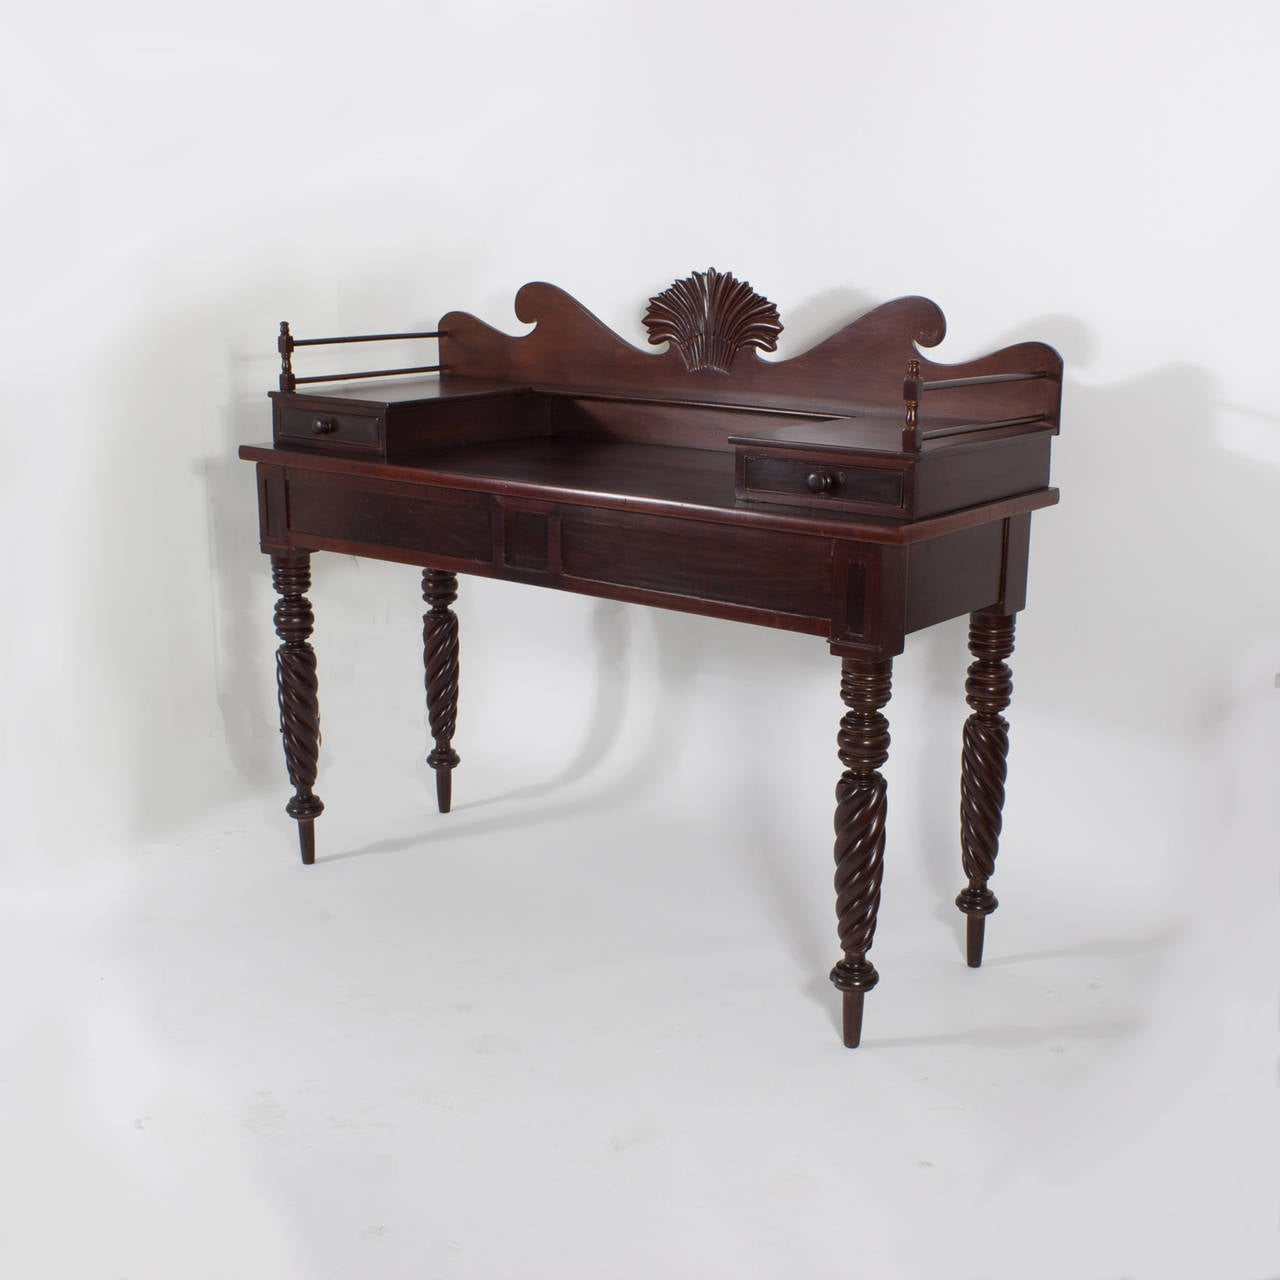 Antique Jamaican, mahogany server or with an especially dramatic form. Featuring  2 flatware drawers,the only storage on the server, a robust backboard with central symbolic wheat carving, and tall turned rope twist carved legs, all combine to make